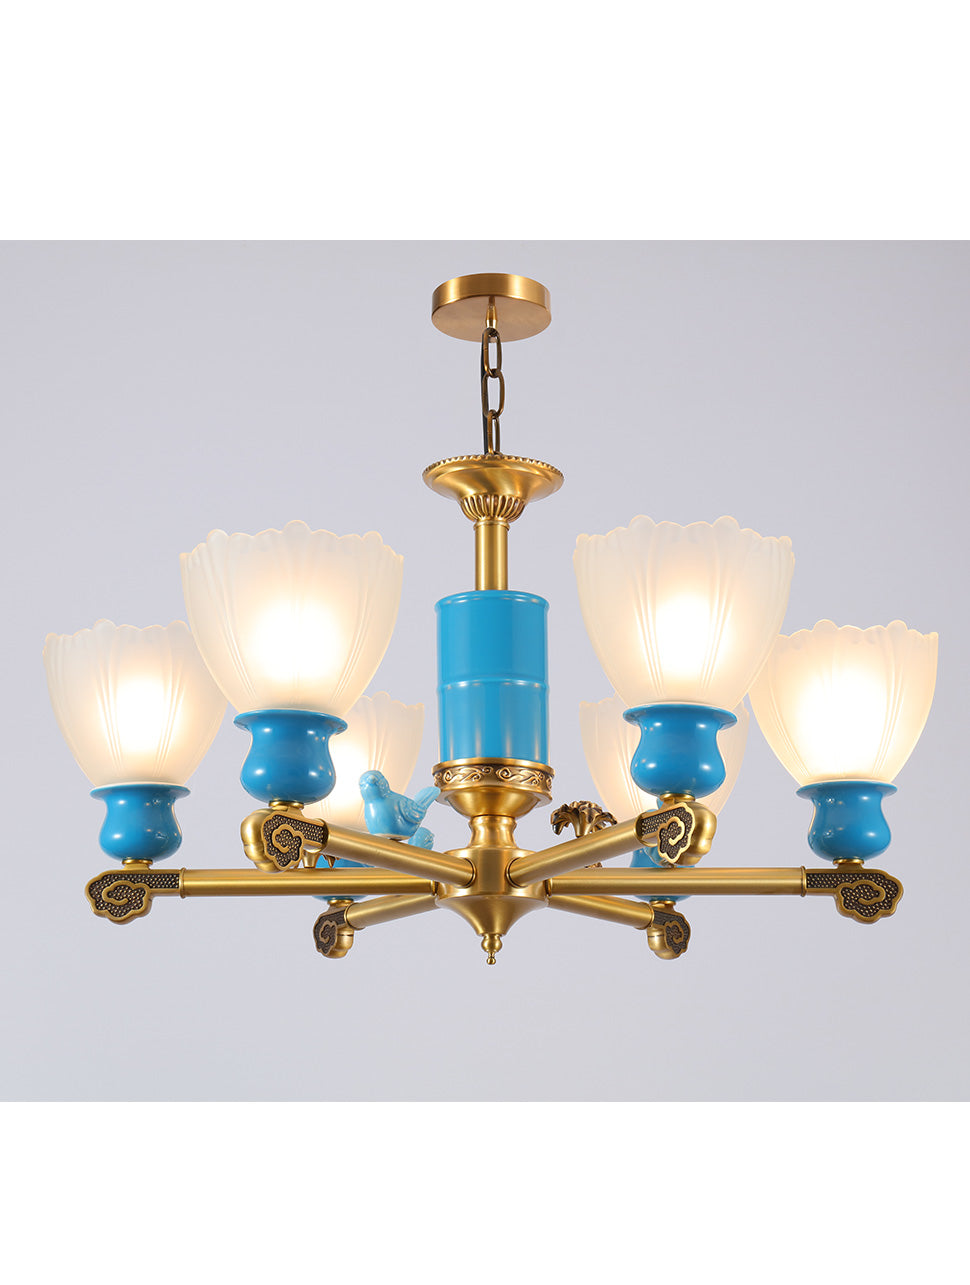 Modern blue chandelier lights for home decor with glass shade